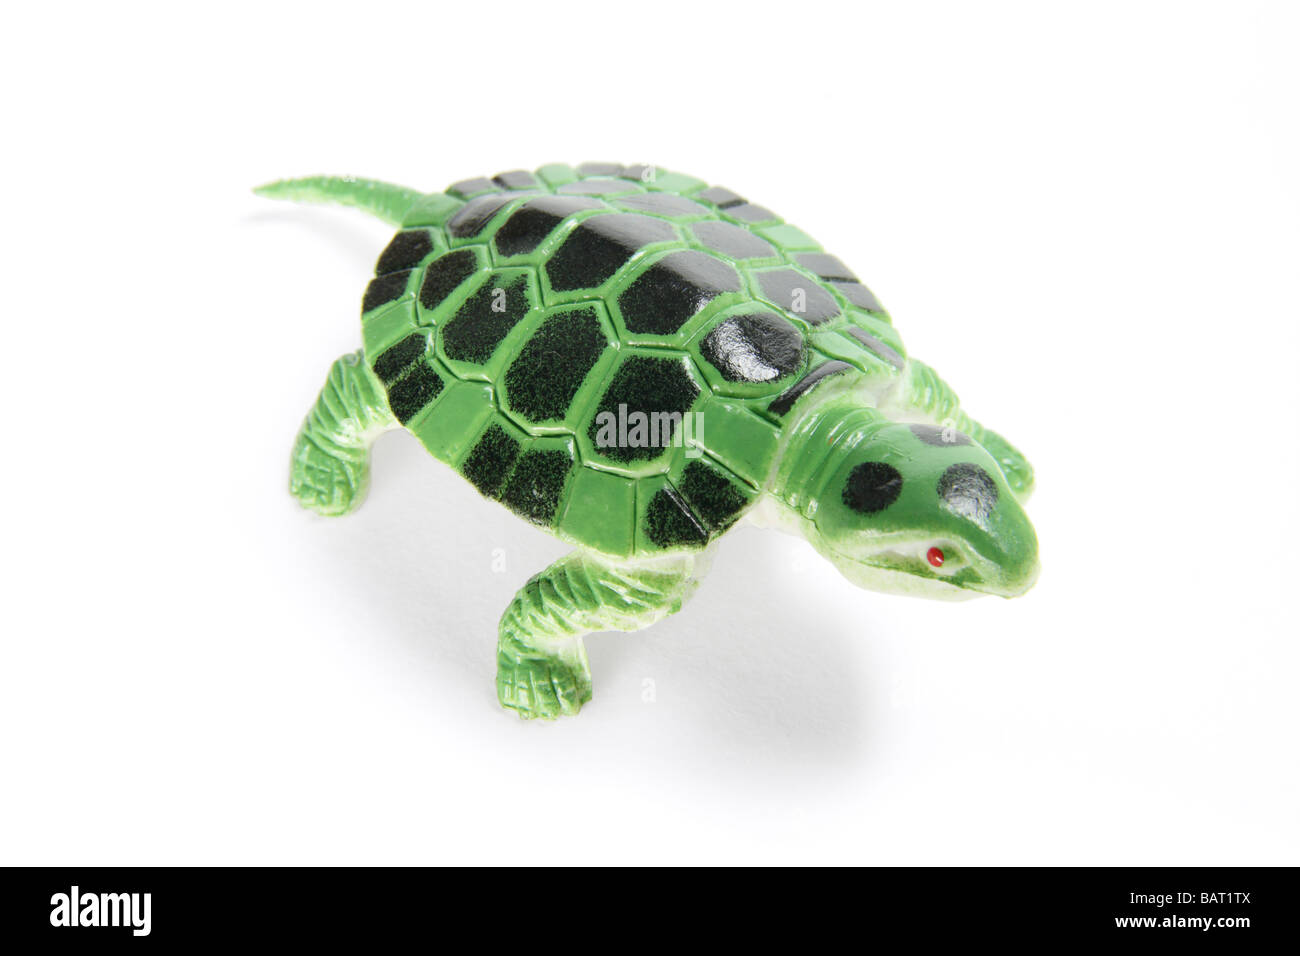 NEW SAND CRITTER BEANIE TOY TORTOISE TURTLE KEYRING BRIGHT PATTERNS SPOTS PUCK